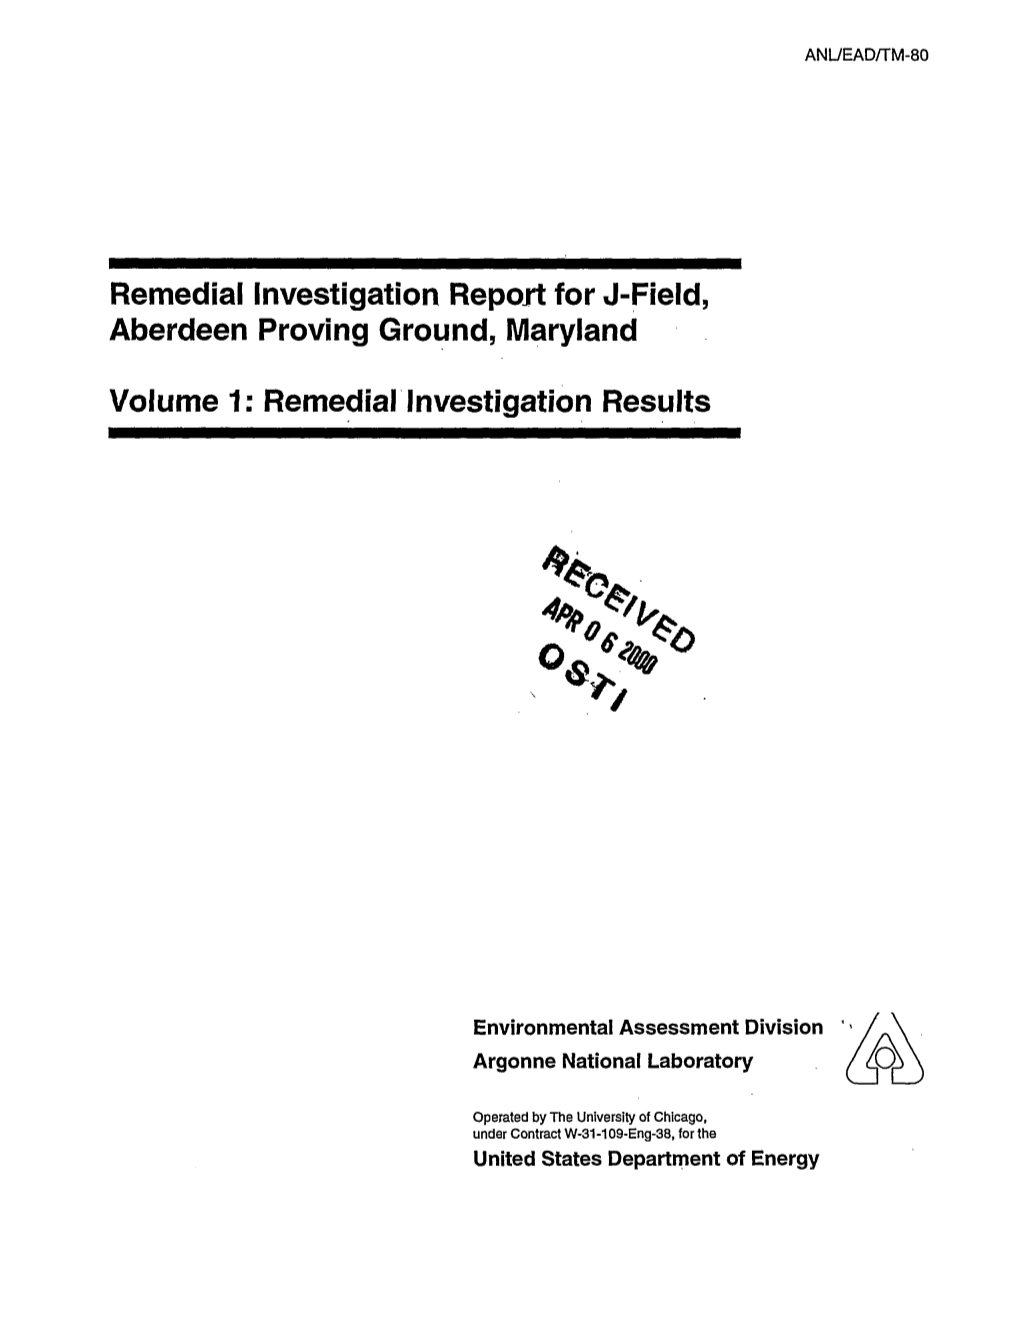 Remedial Investigation Report for J-Field, Aberdeen Proving Ground, Maryland